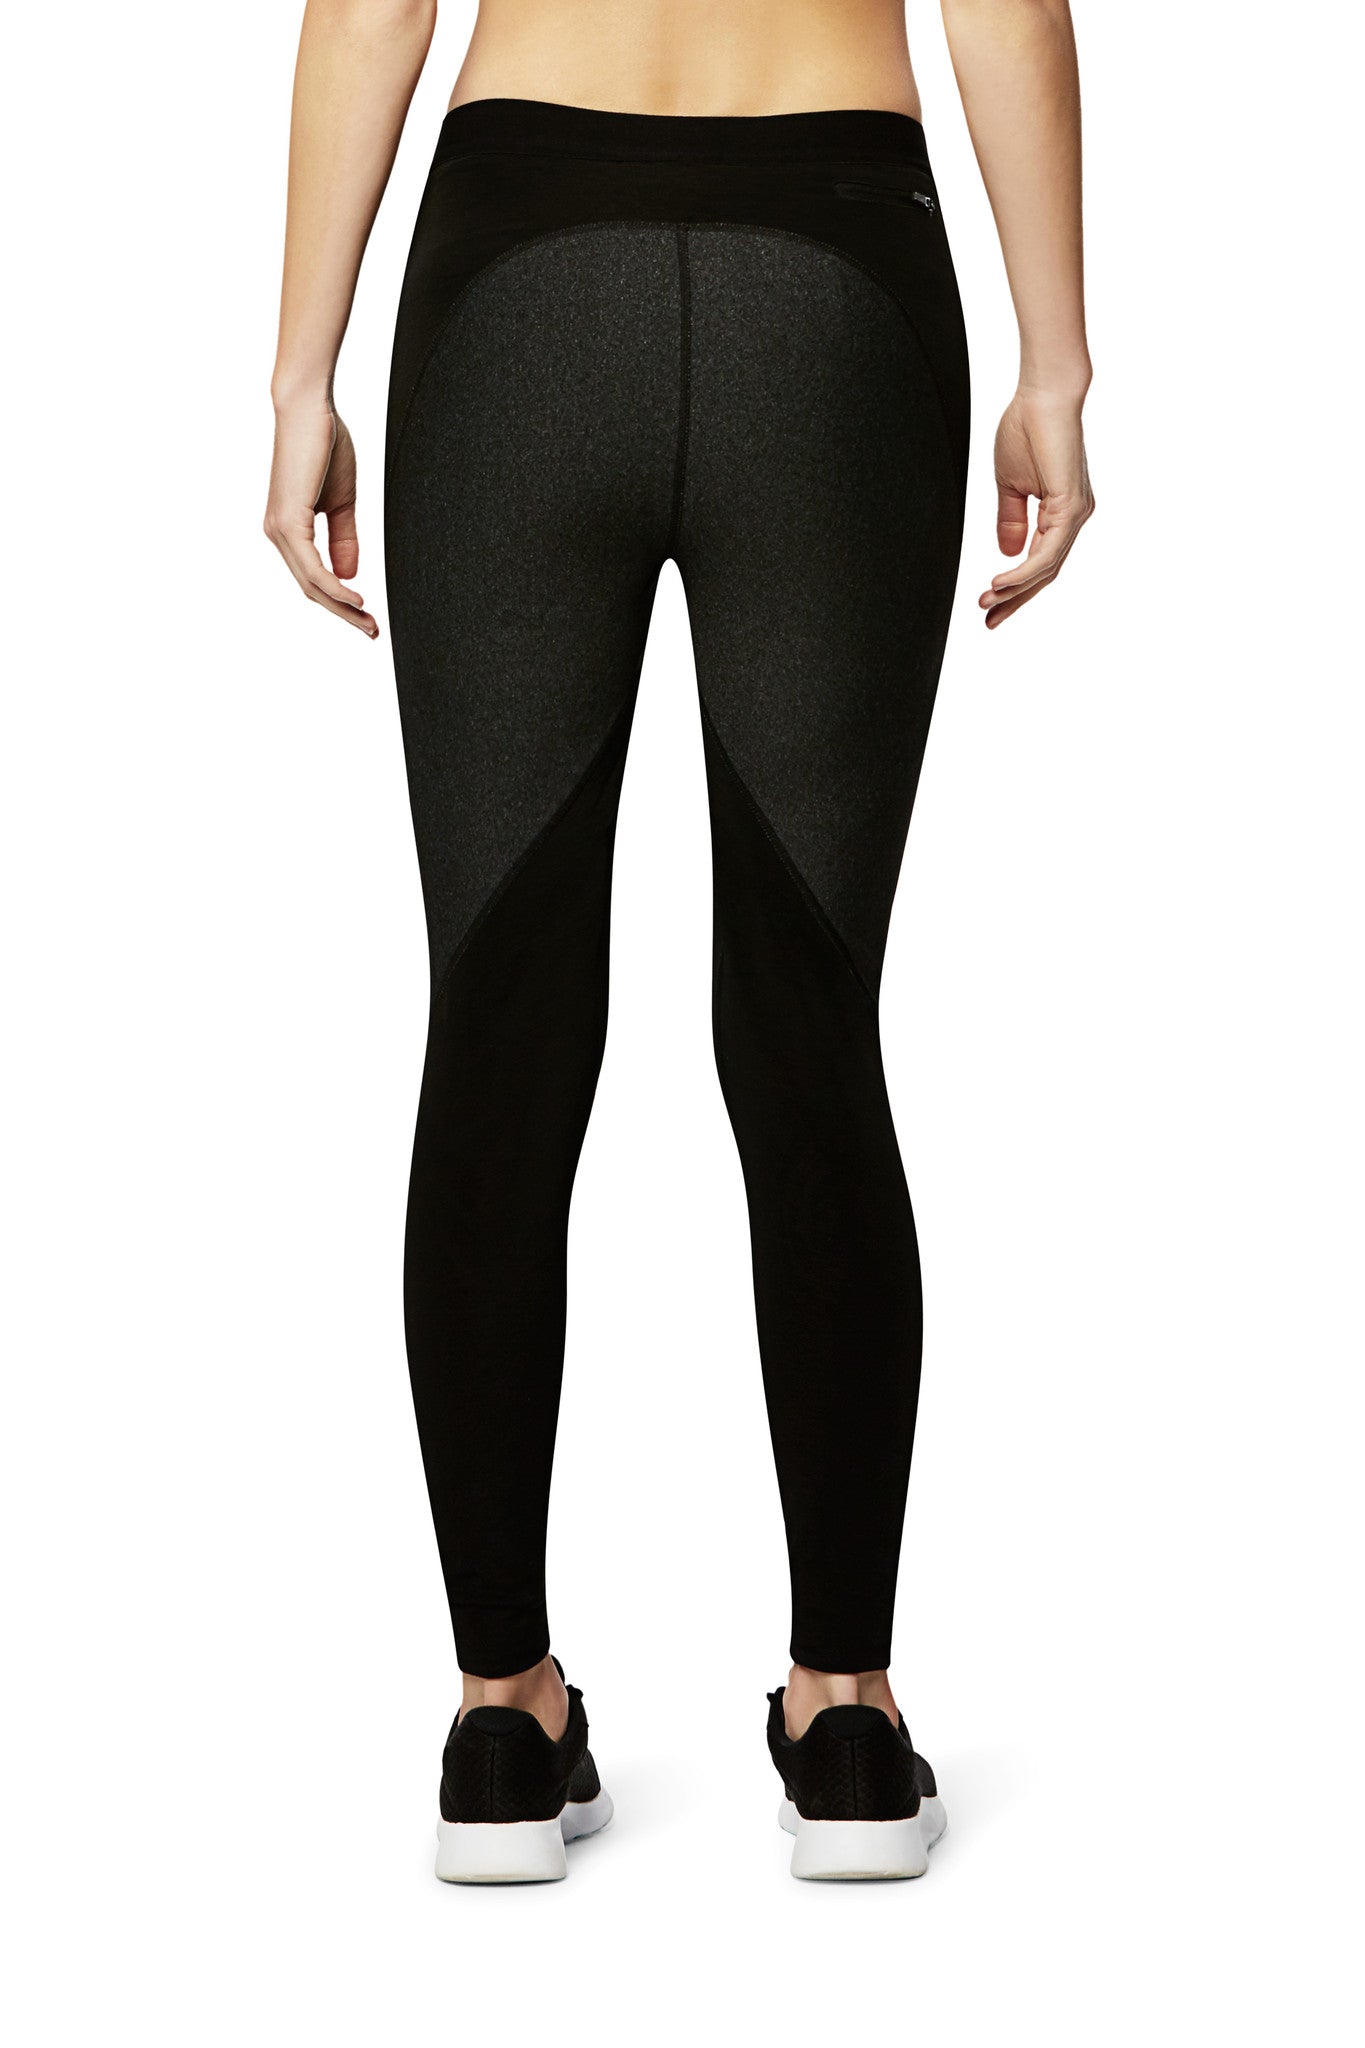 Pro Women's Training Tights –  Review 